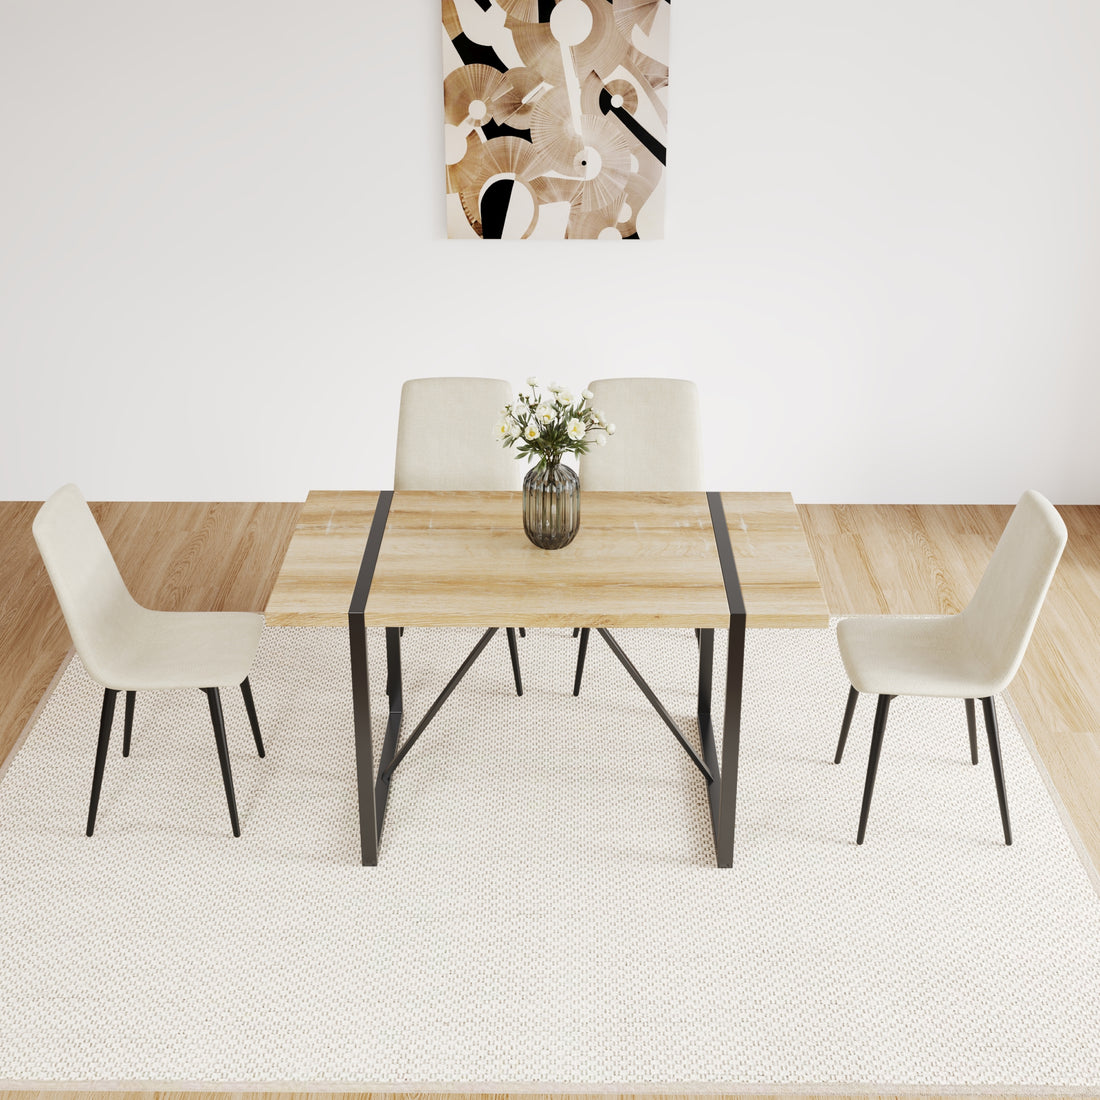 Mdf Wood Colour Dining Table And Modern Dining